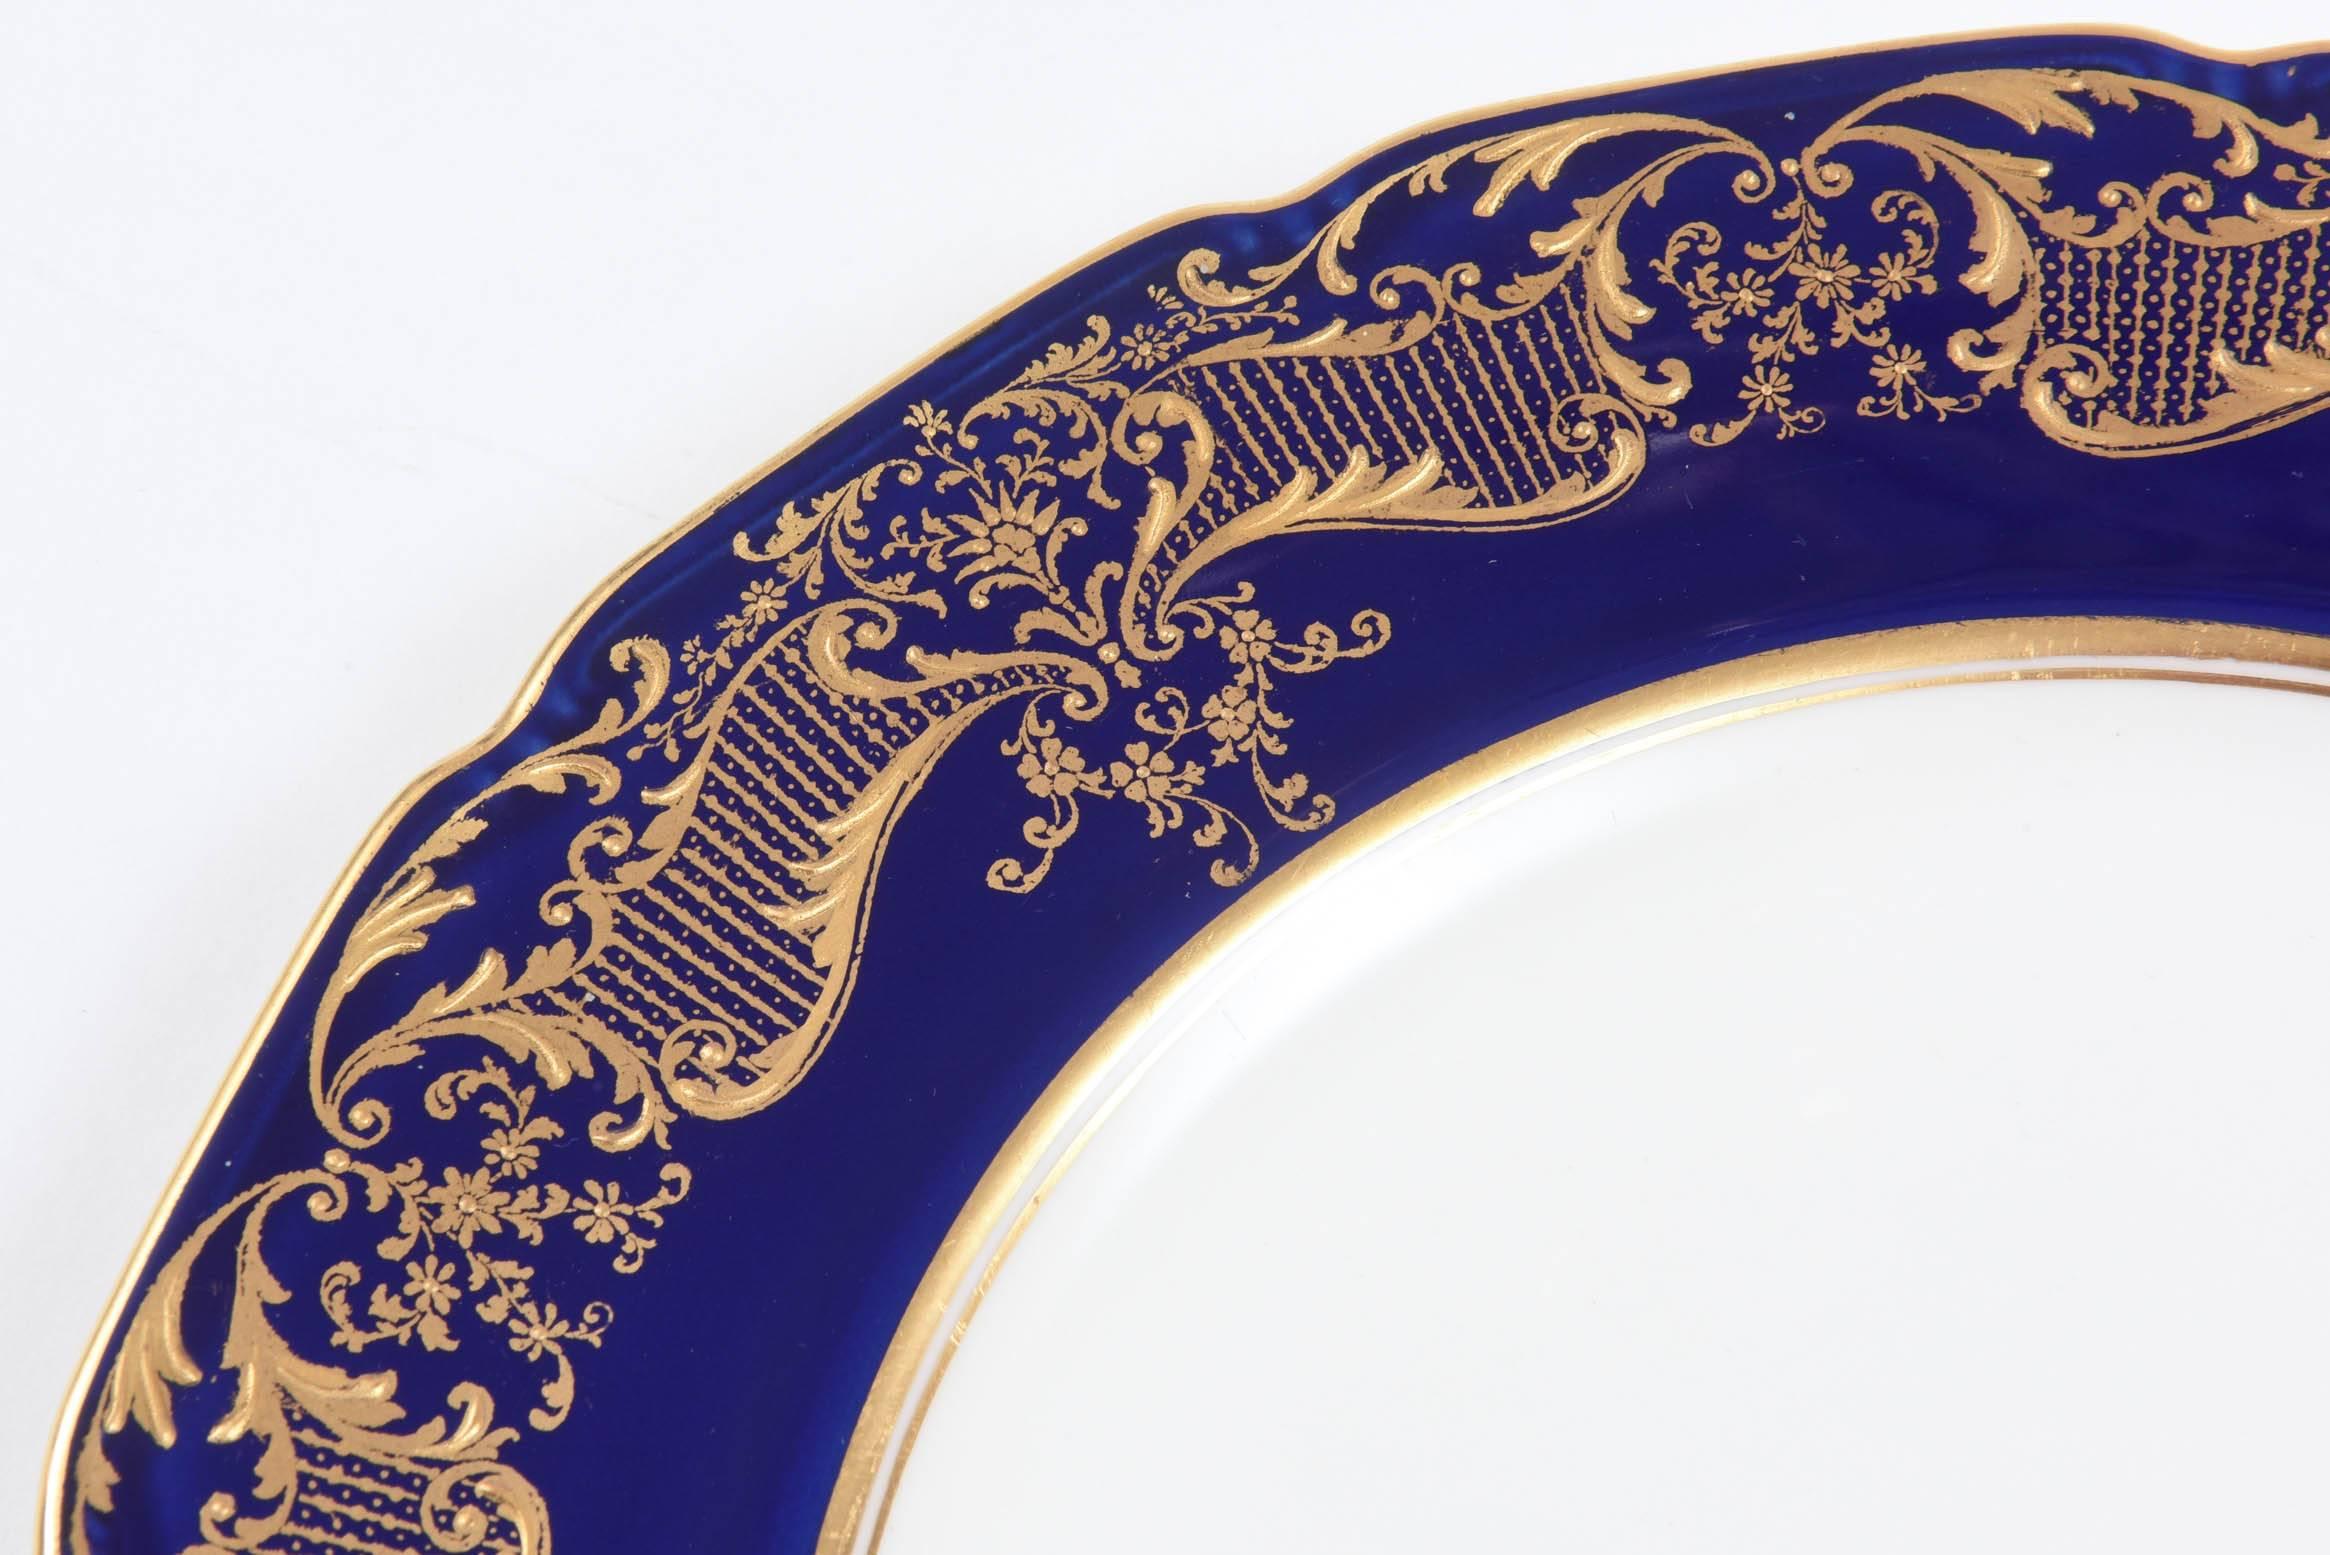 A classic shape by Royal Doulton England and Circa 1920. We love the elegant raised tooled gilding on the cobalt blue collars. Crisp white porcelain and nice clean centers. Ready to mix and match in with all your fine table top. Great Antique